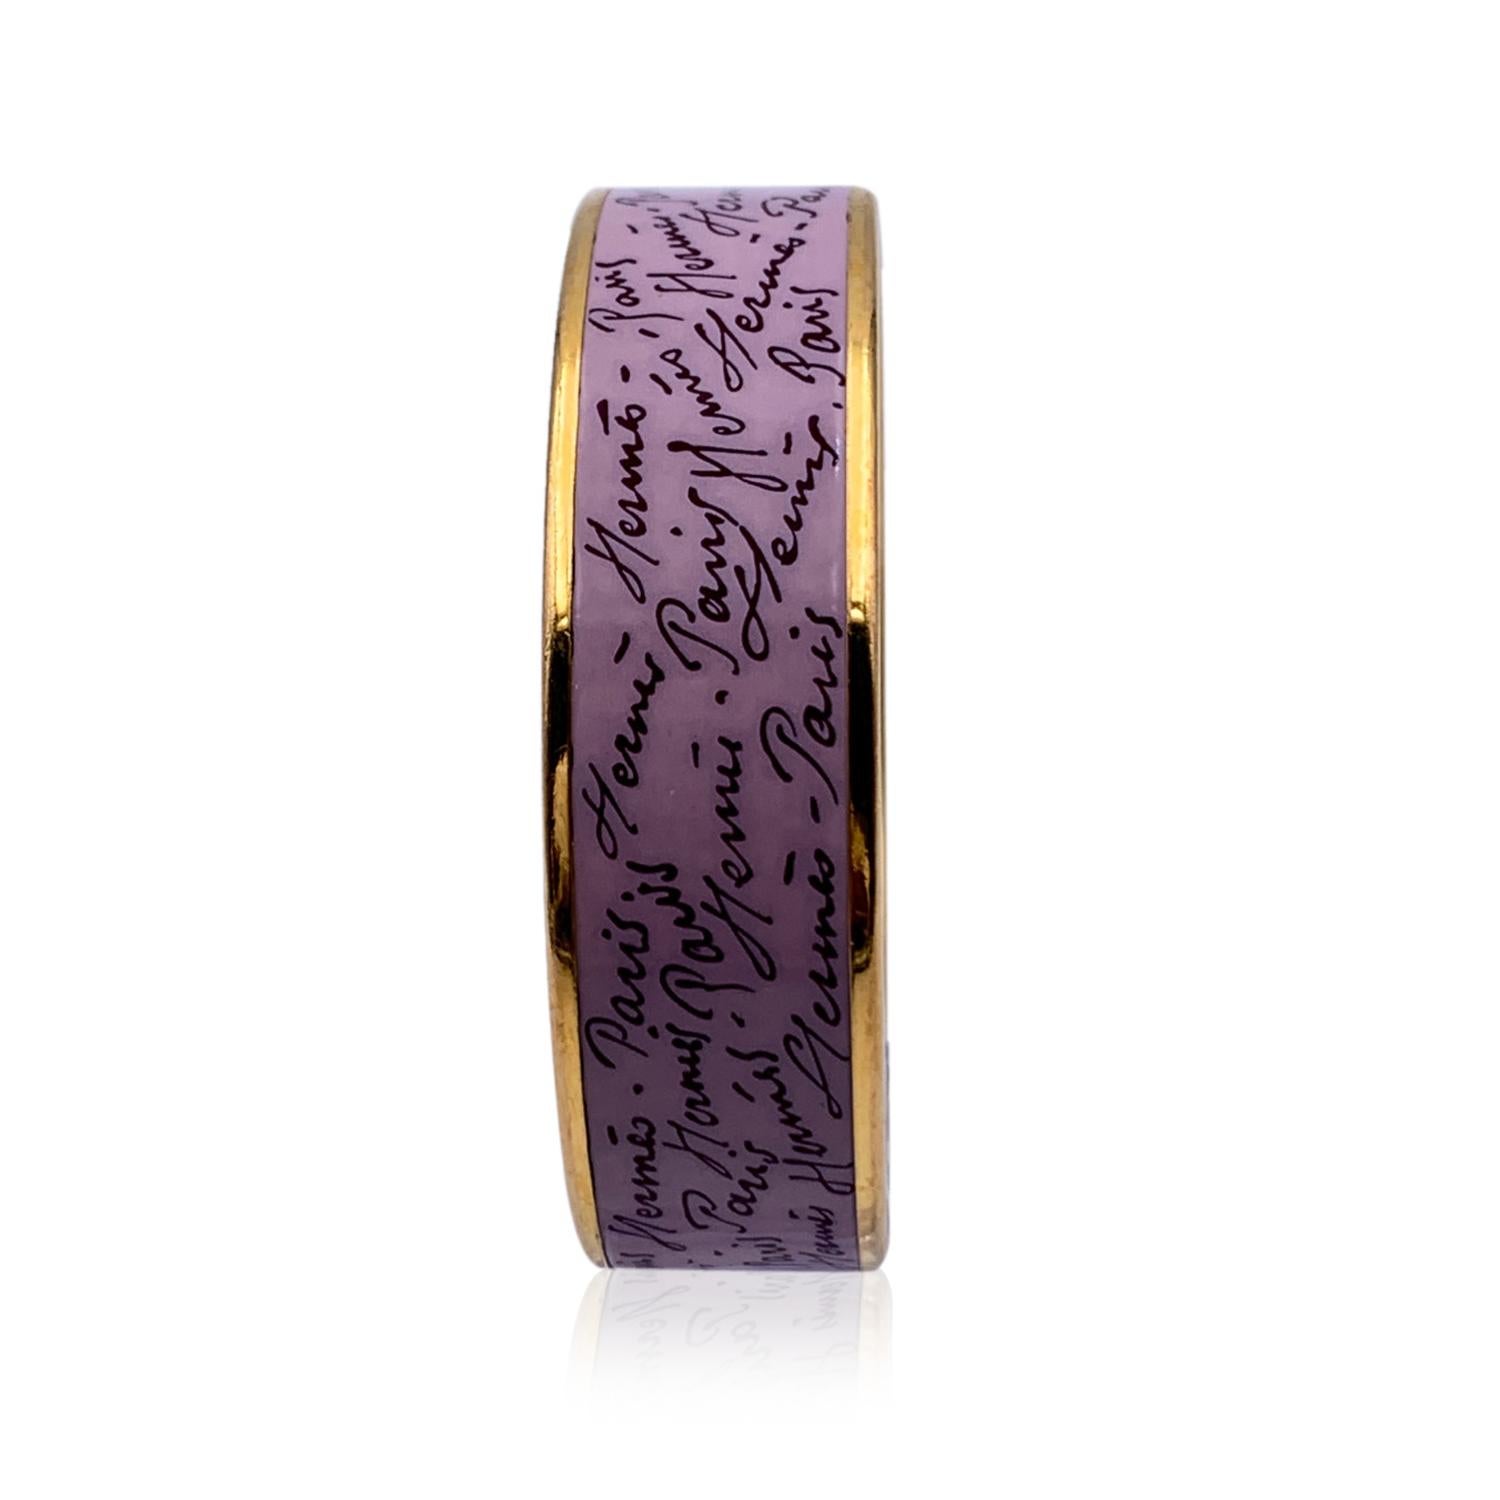 A truly stunning enameled 'Script' bangle bracelet by HERMES. Lilac color with 'Hermes Paris' script print. Gold metal rim. Black enameled interior. Inner diameter: approx. 2.5 inches -' 6.4 cm. HERMES Paris' & 'Made in Austria' embossed inside the